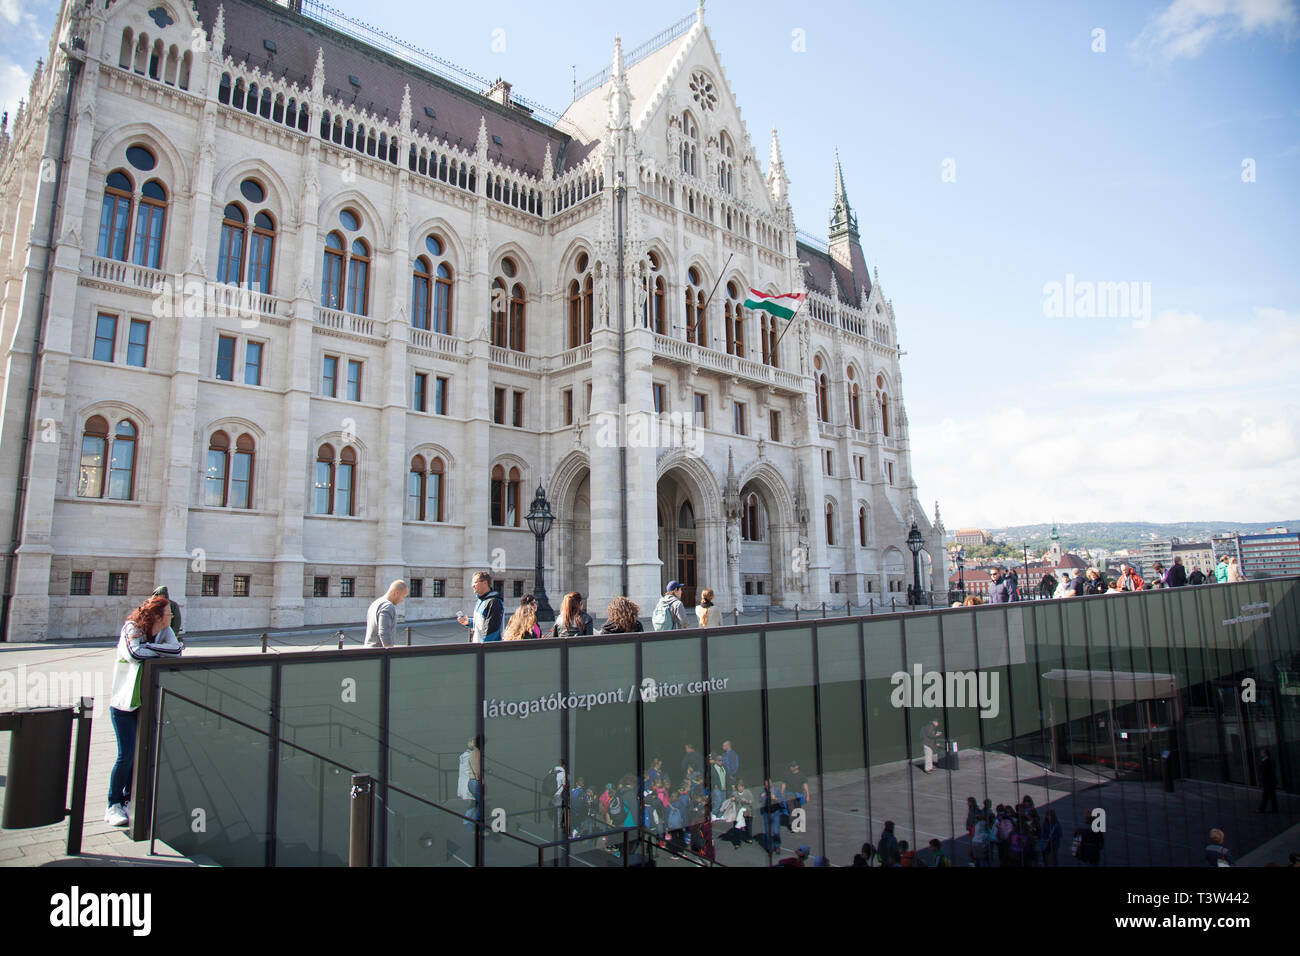 BUDAPEST, HUNGARY - SEPTEMBER 22, 2017: Entrance to the Visitors Center at the Hungarian Parliament buildings.in Budapest. Stock Photo